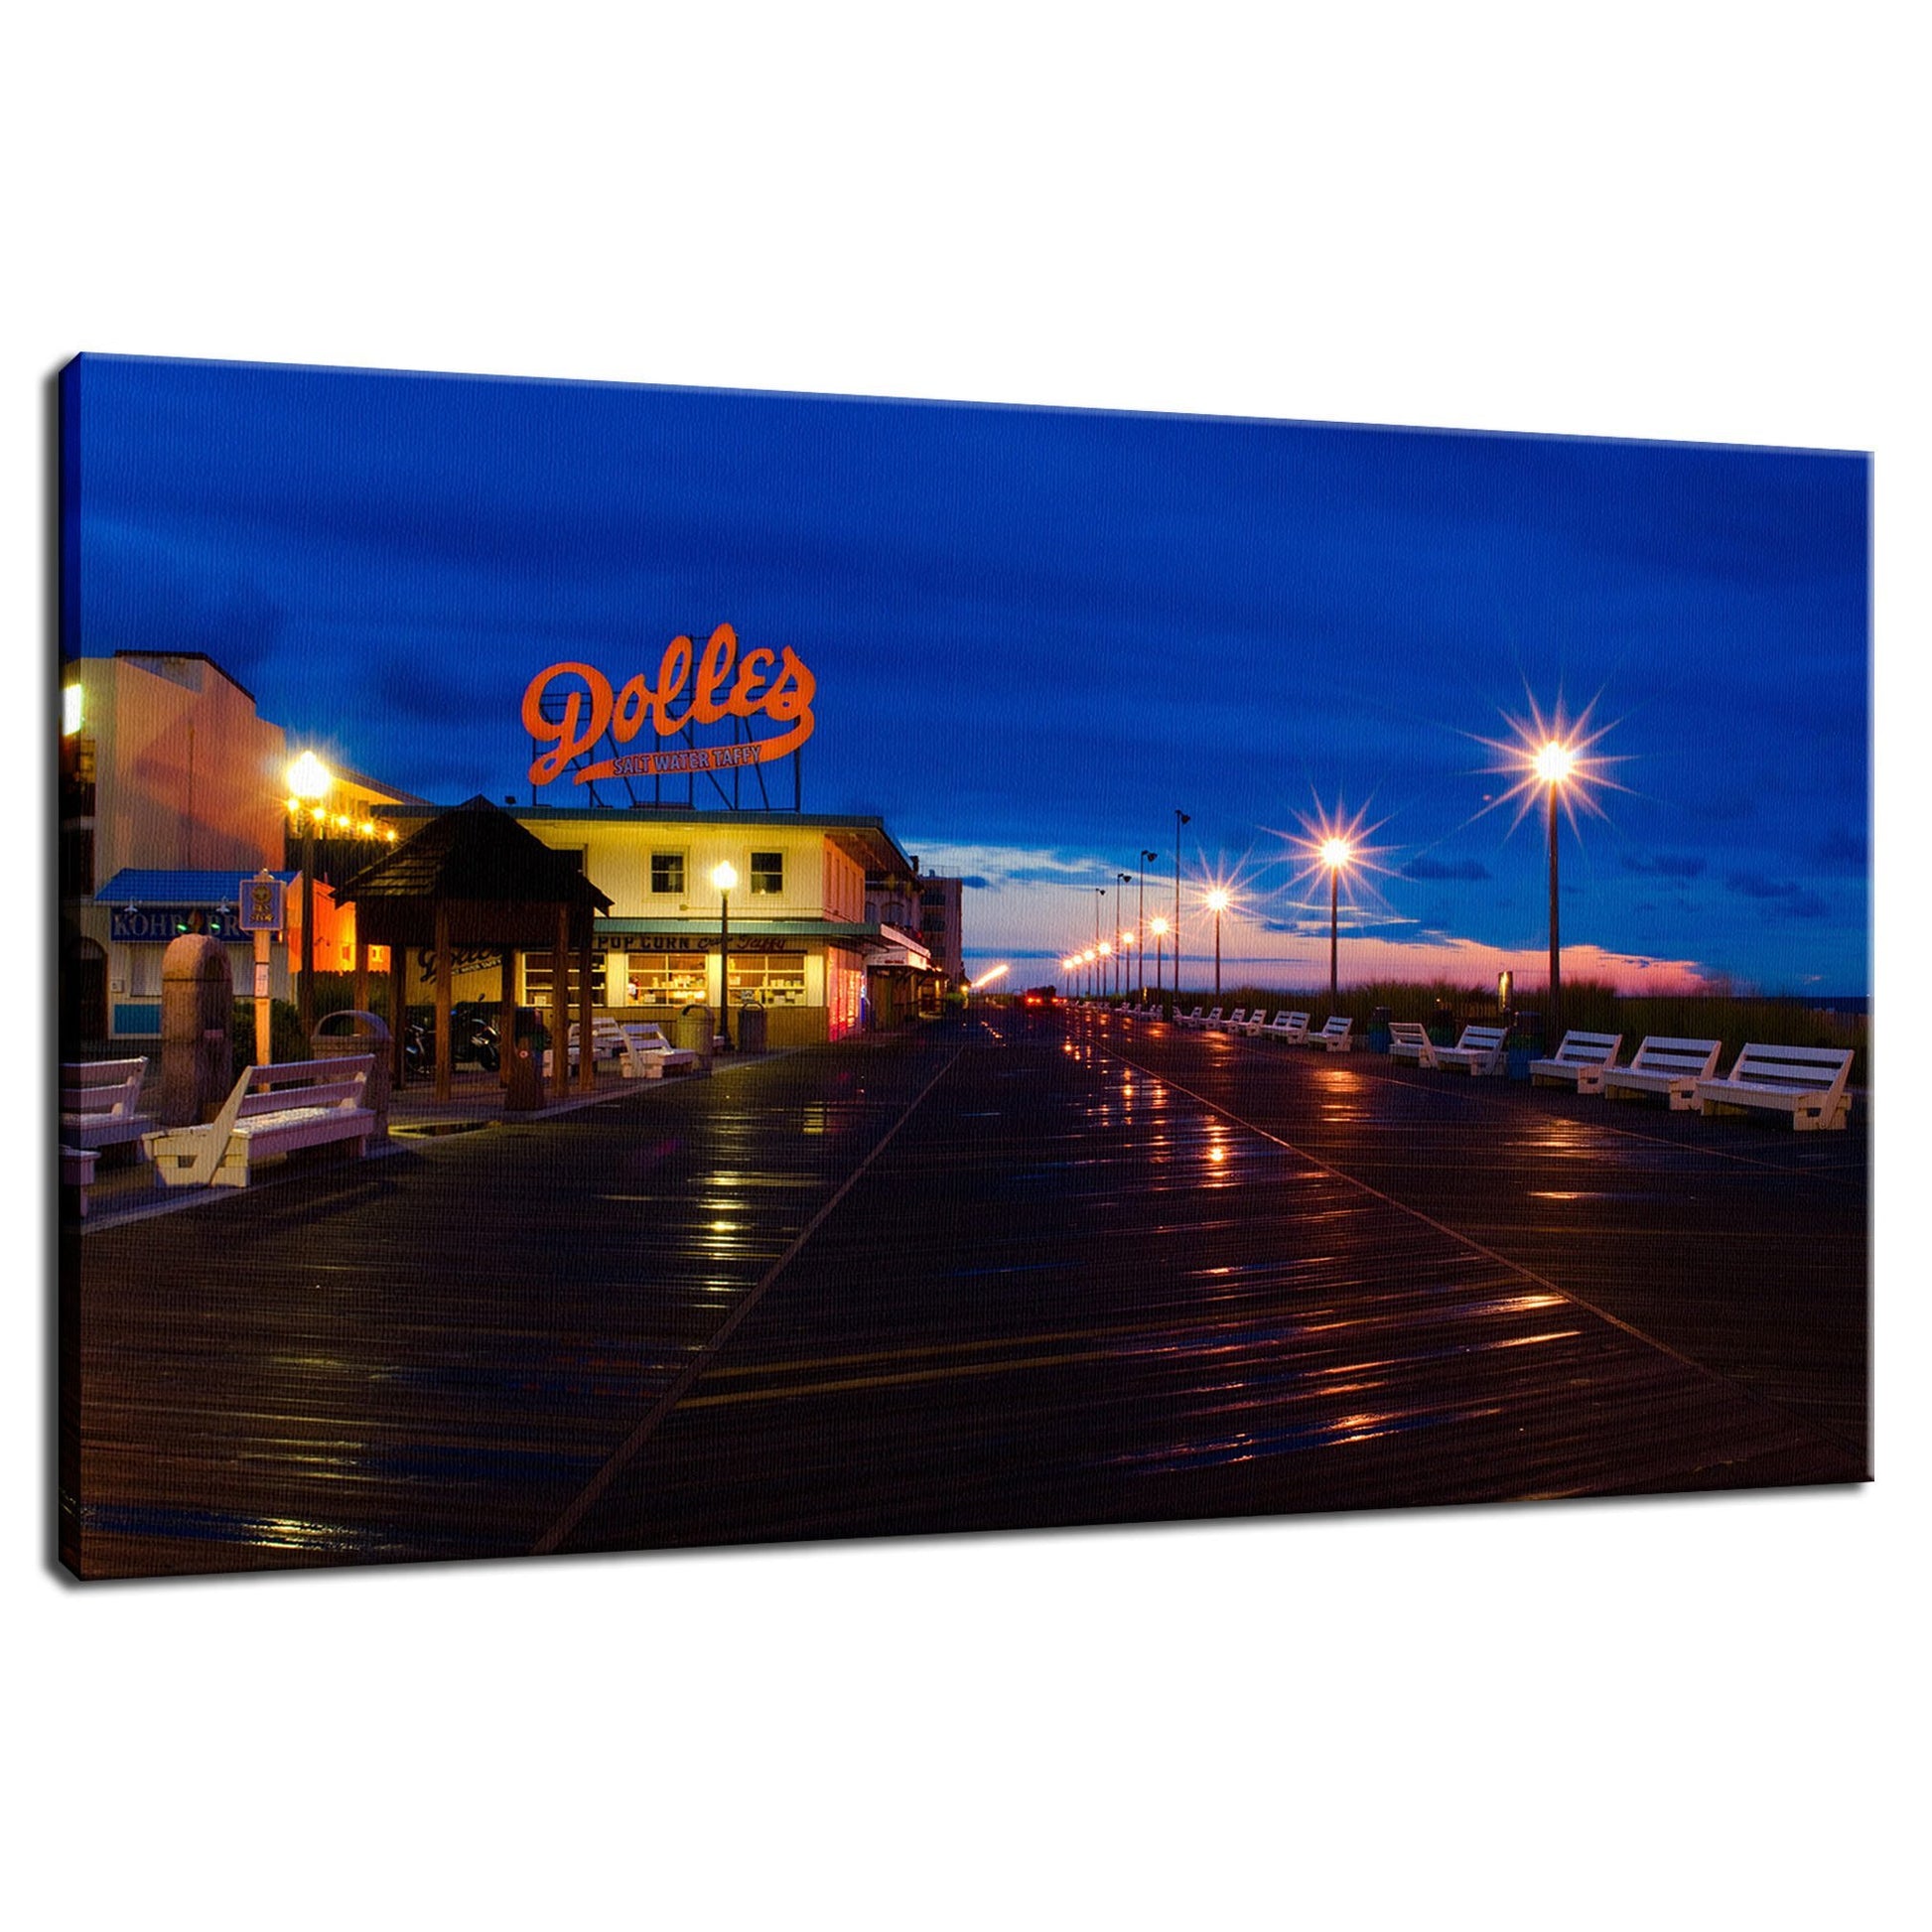 Early Morning at Dolles Night Photo Fine Art Canvas Wall Art Prints  - PIPAFINEART